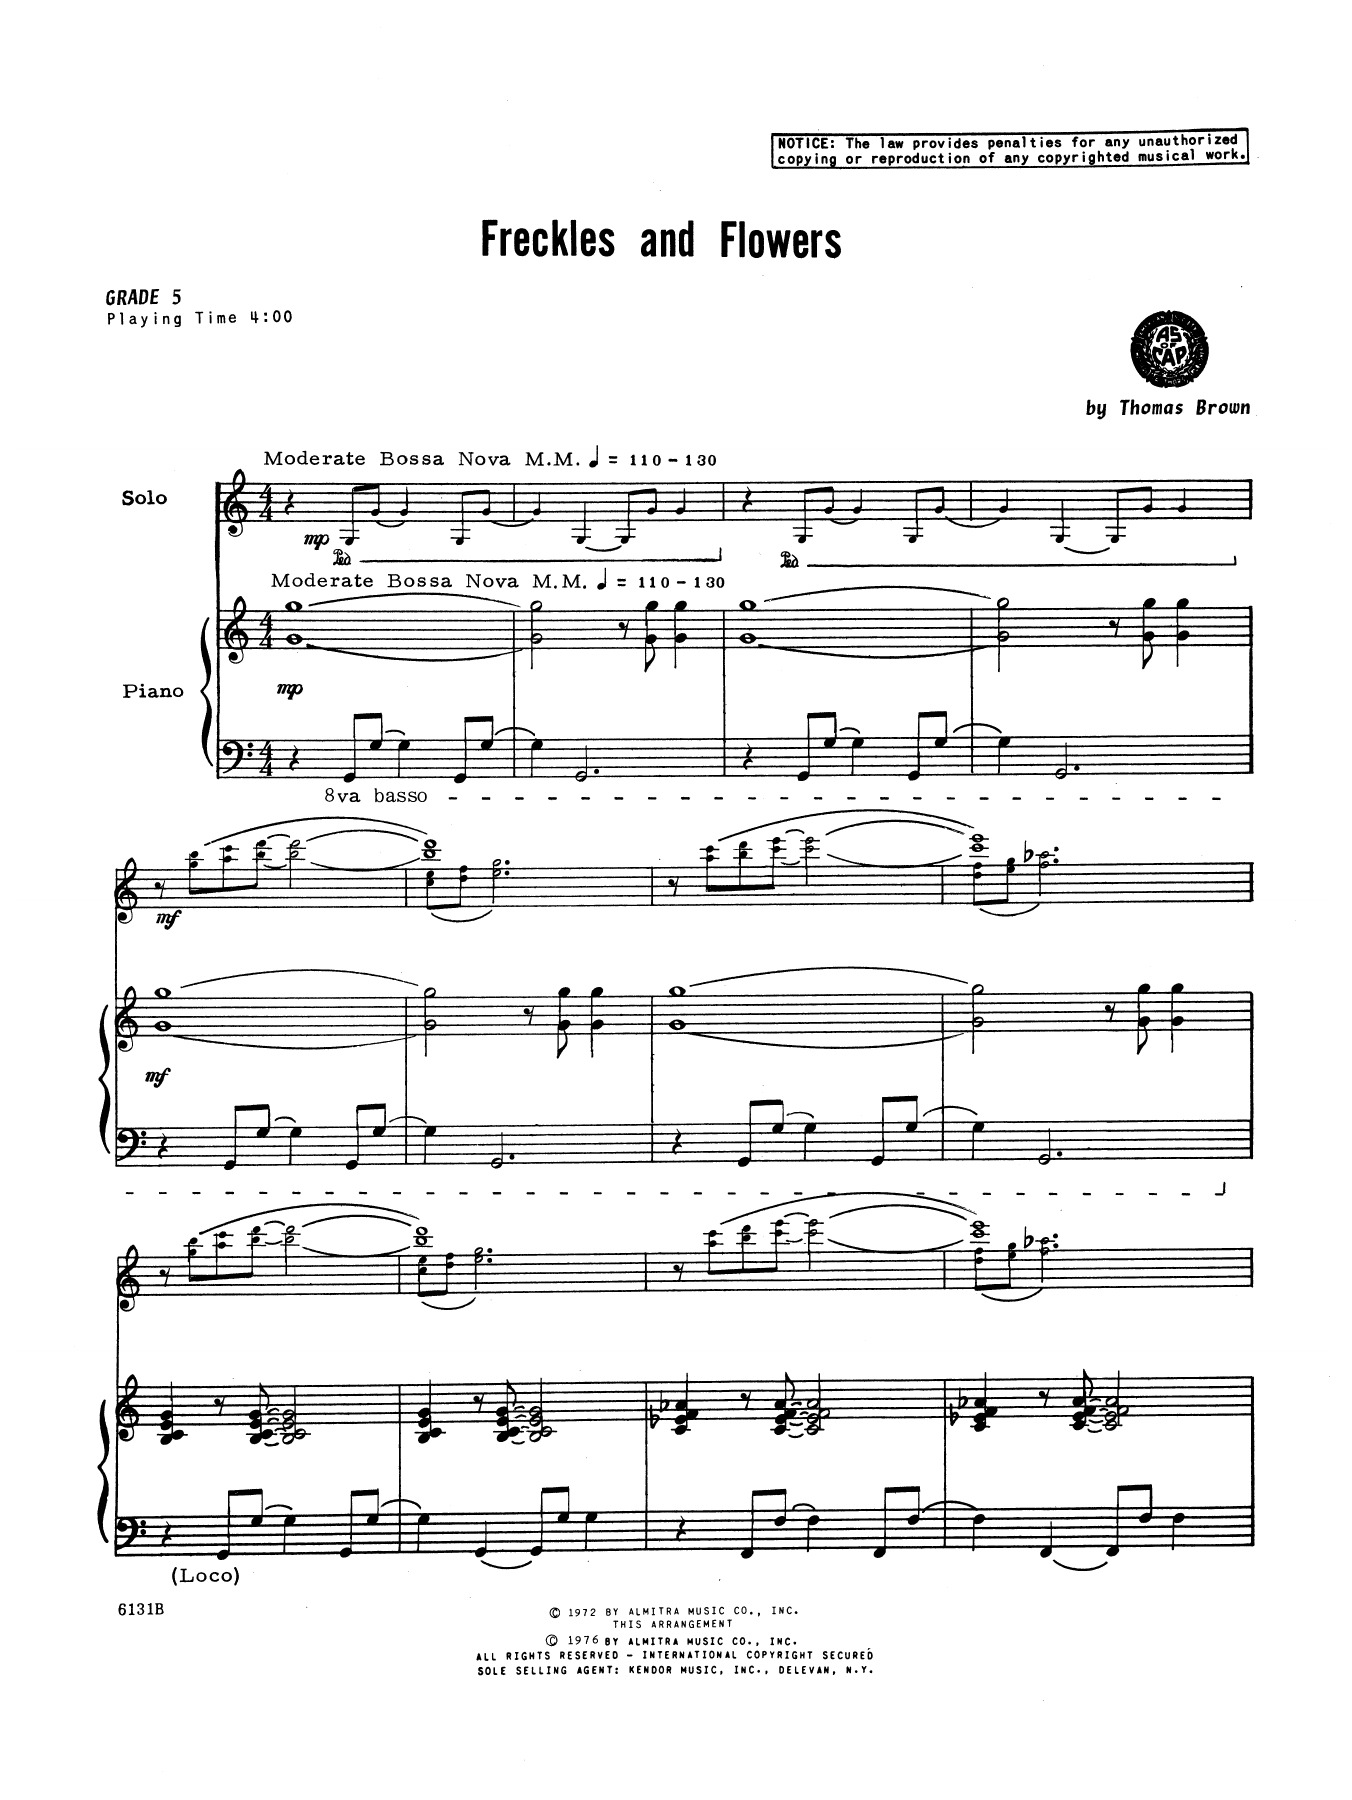 Download Tom Brown Freckles And Flowers - Piano Accompanim Sheet Music